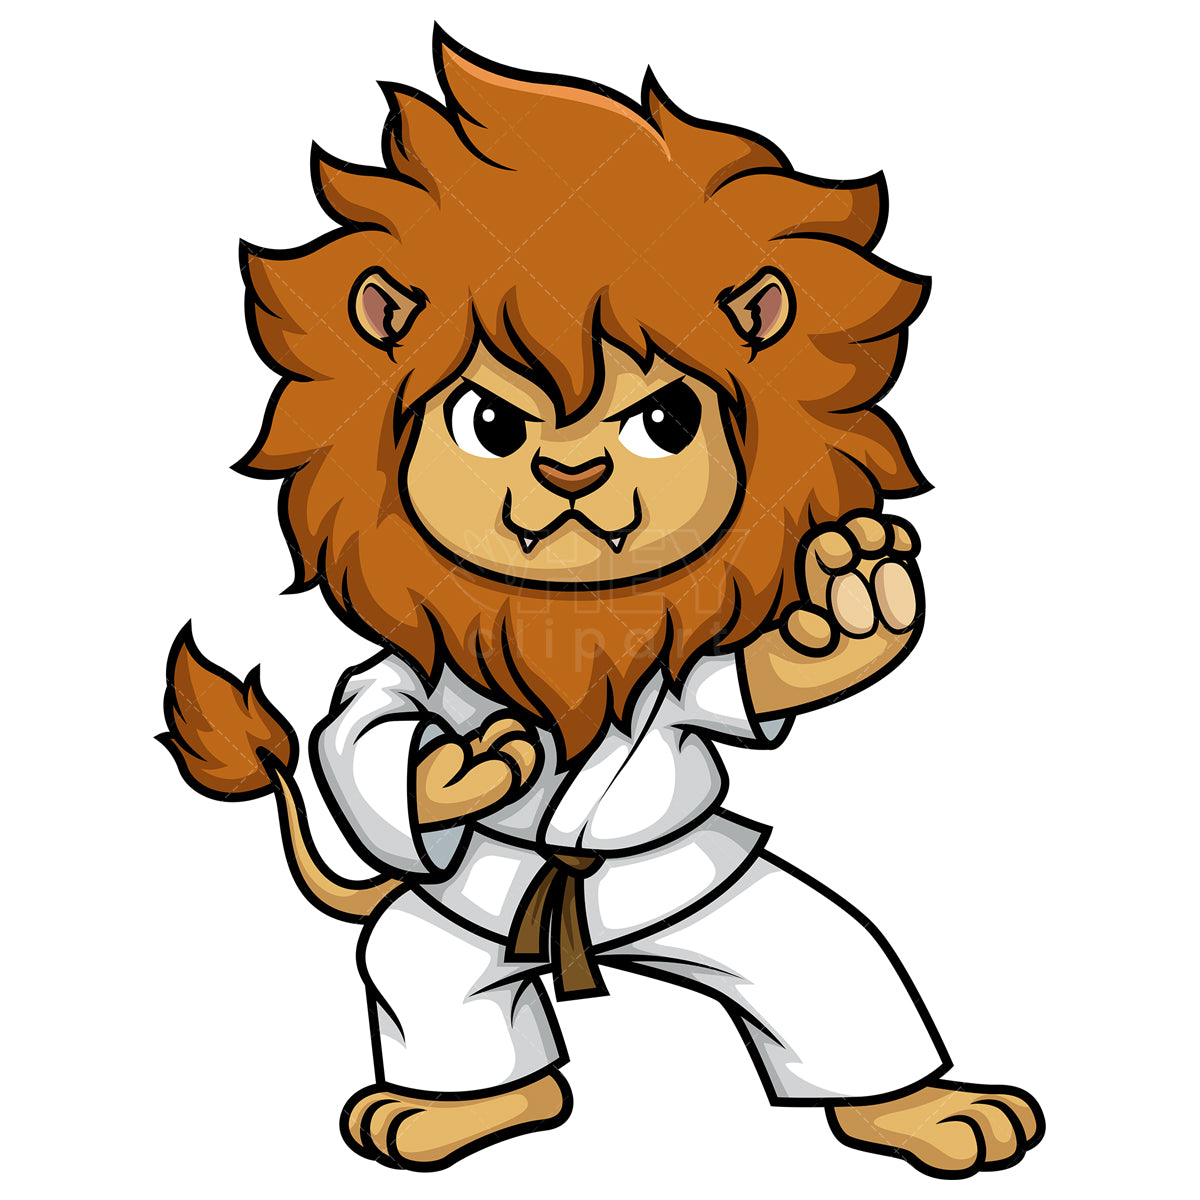 Royalty-free stock vector illustration of  a lion doing karate.